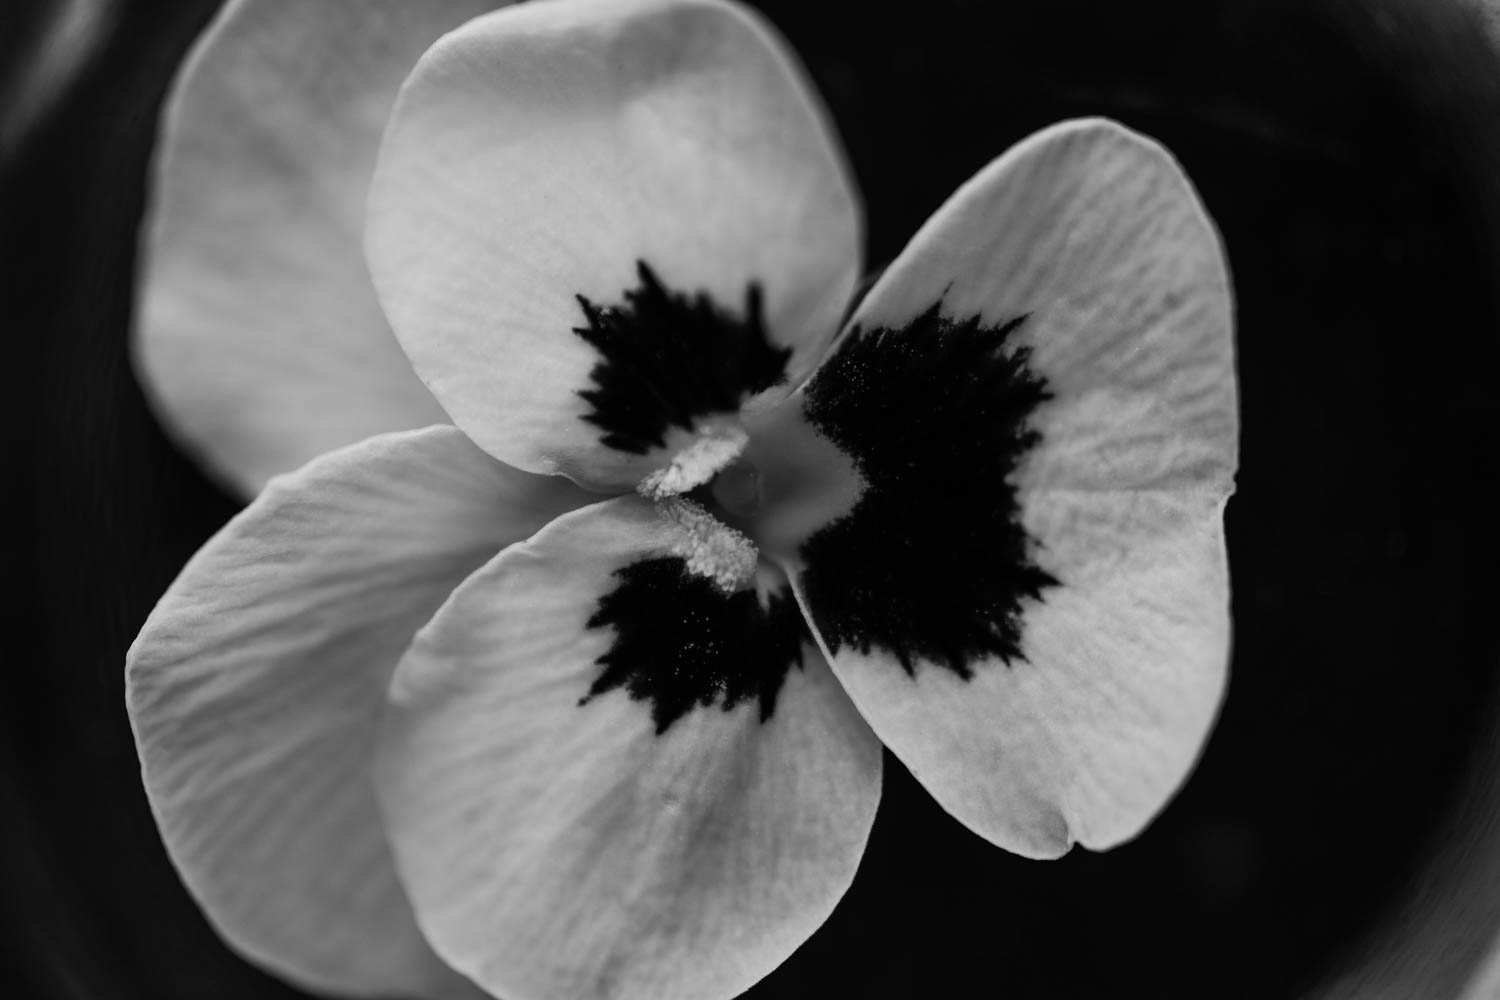 Pansy a fresh edible flower black and white photograph.